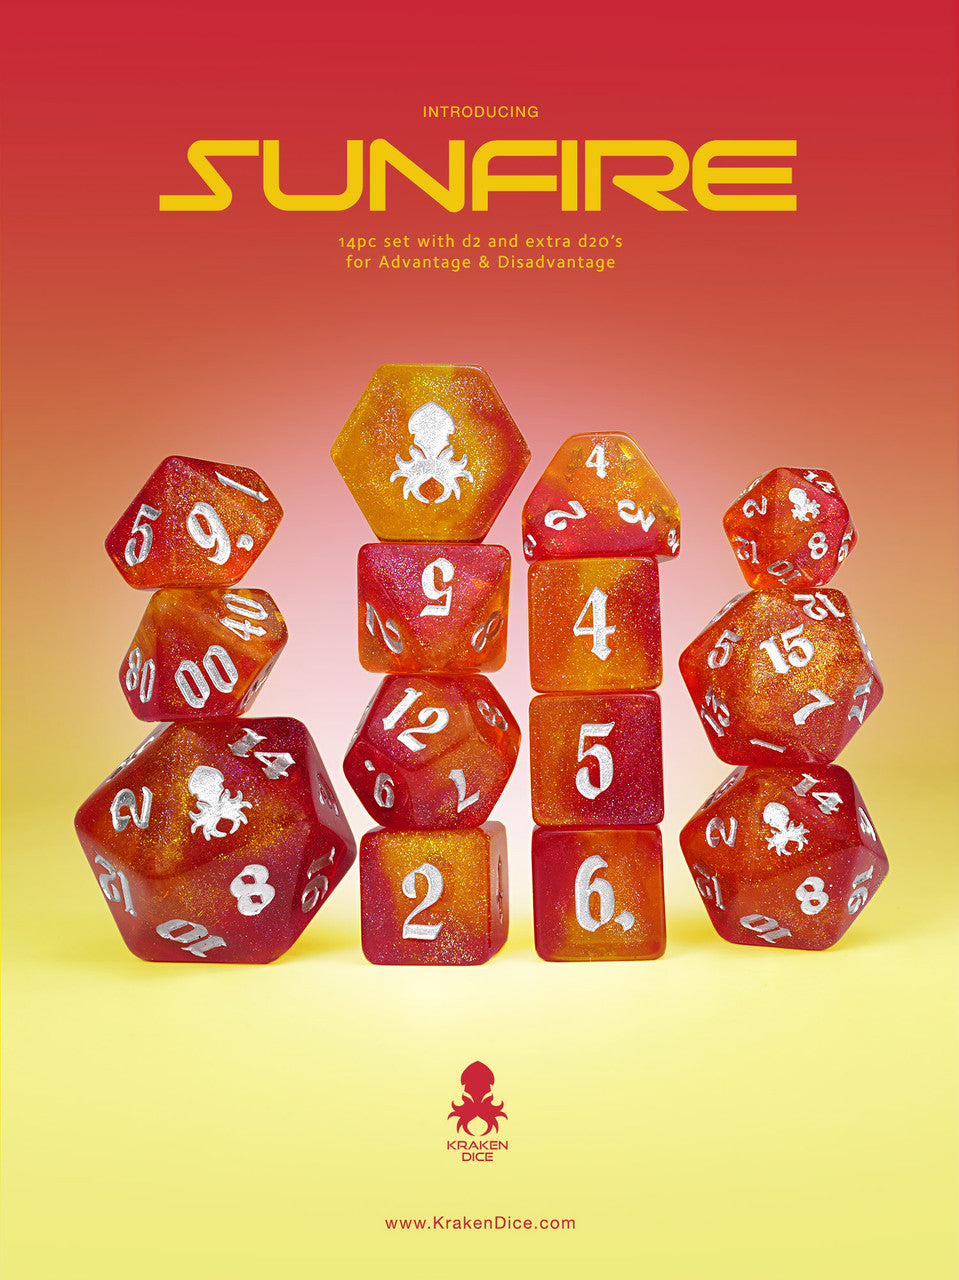 Sunfire 14pc Dice Set for TTRPGs inked in Silver